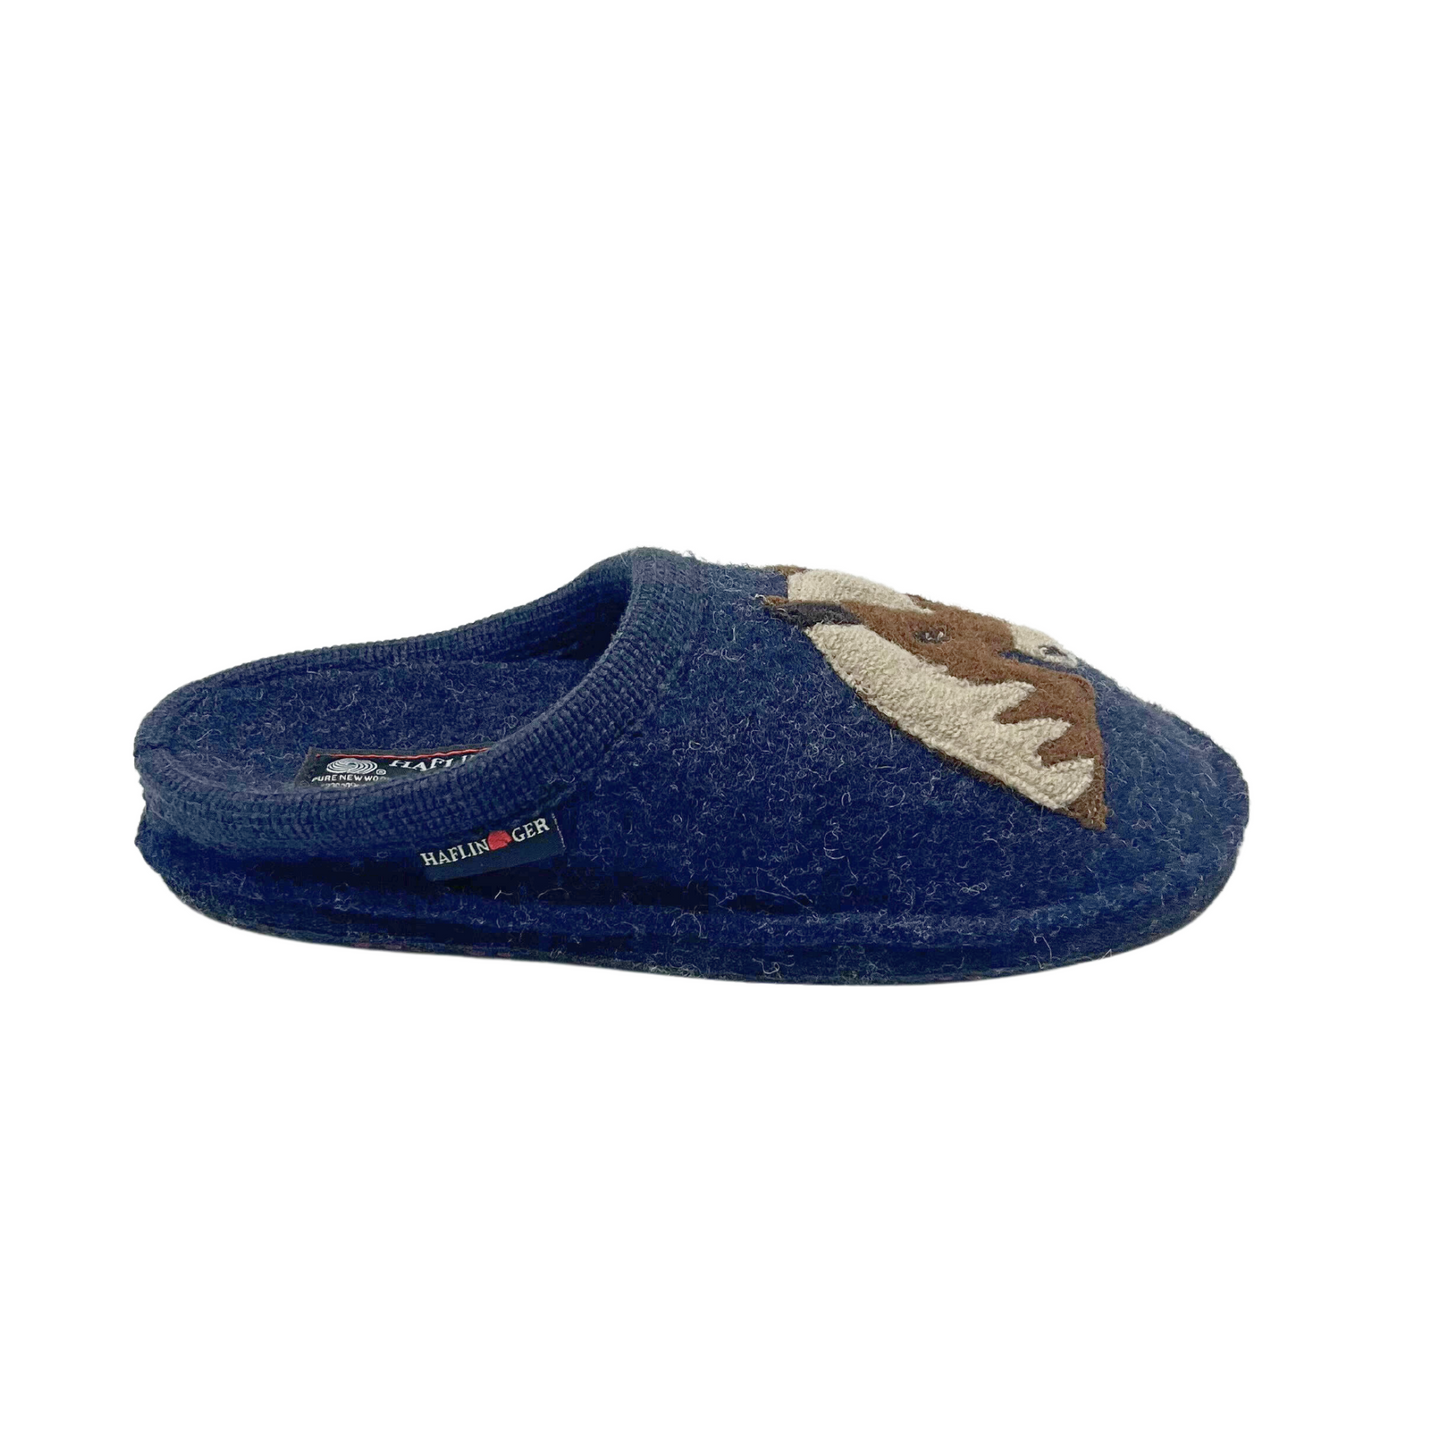 Outside view of a boiled wool slipper with a horse depicted on the front.  Arch support inside